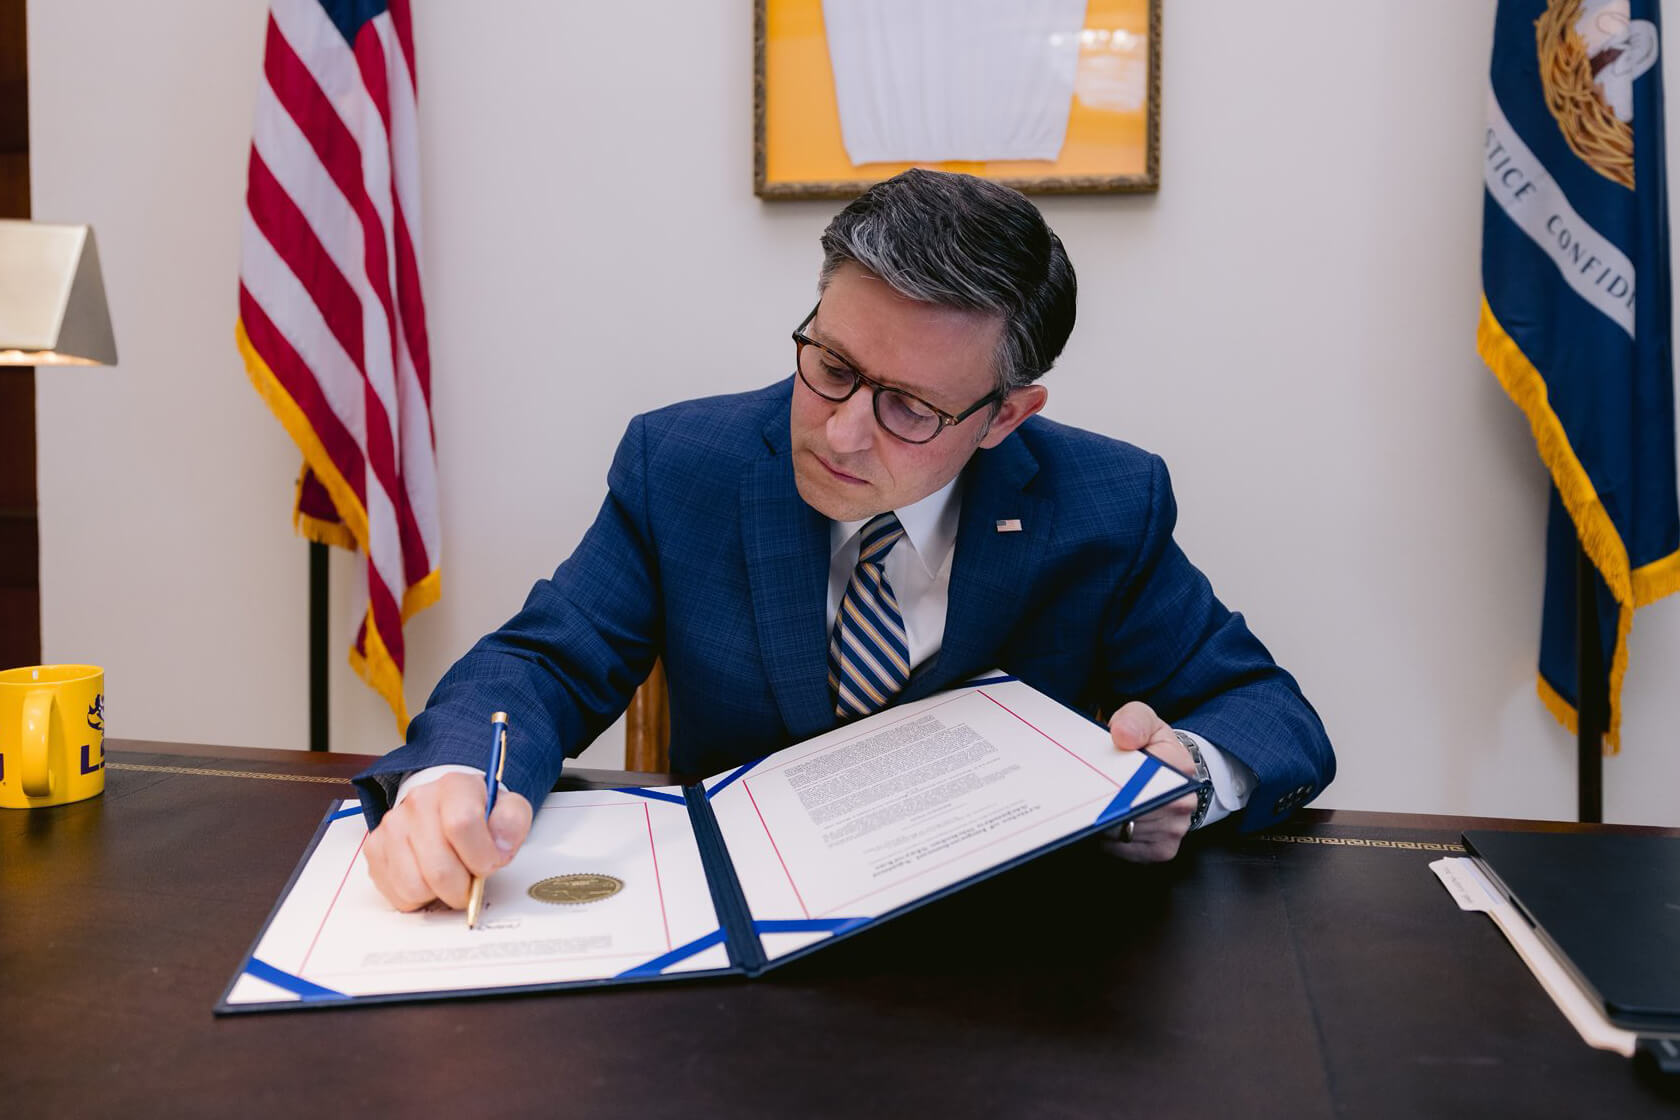 Image of Mike Johnson signing a document.